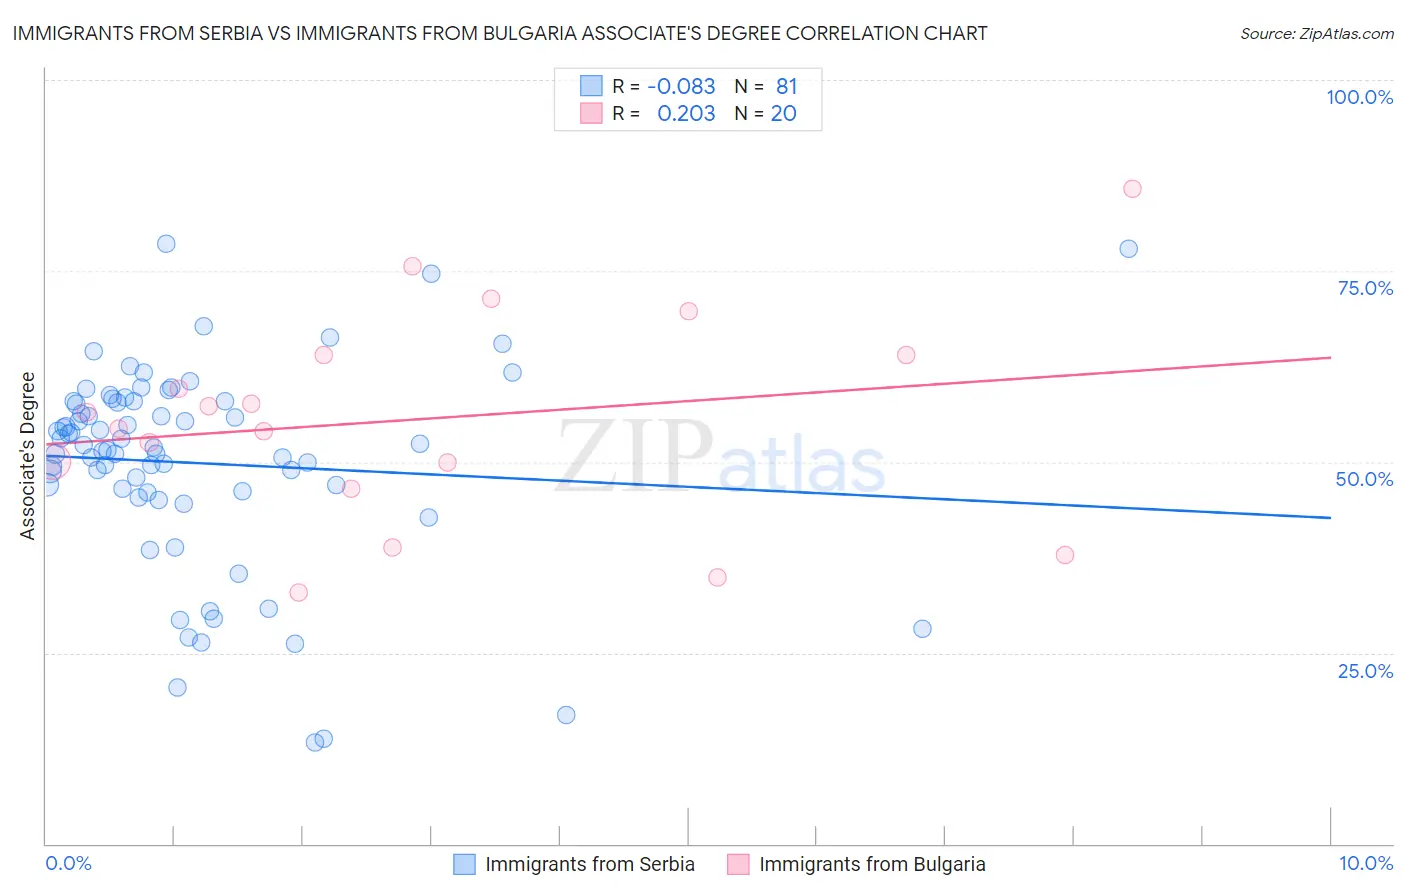 Immigrants from Serbia vs Immigrants from Bulgaria Associate's Degree